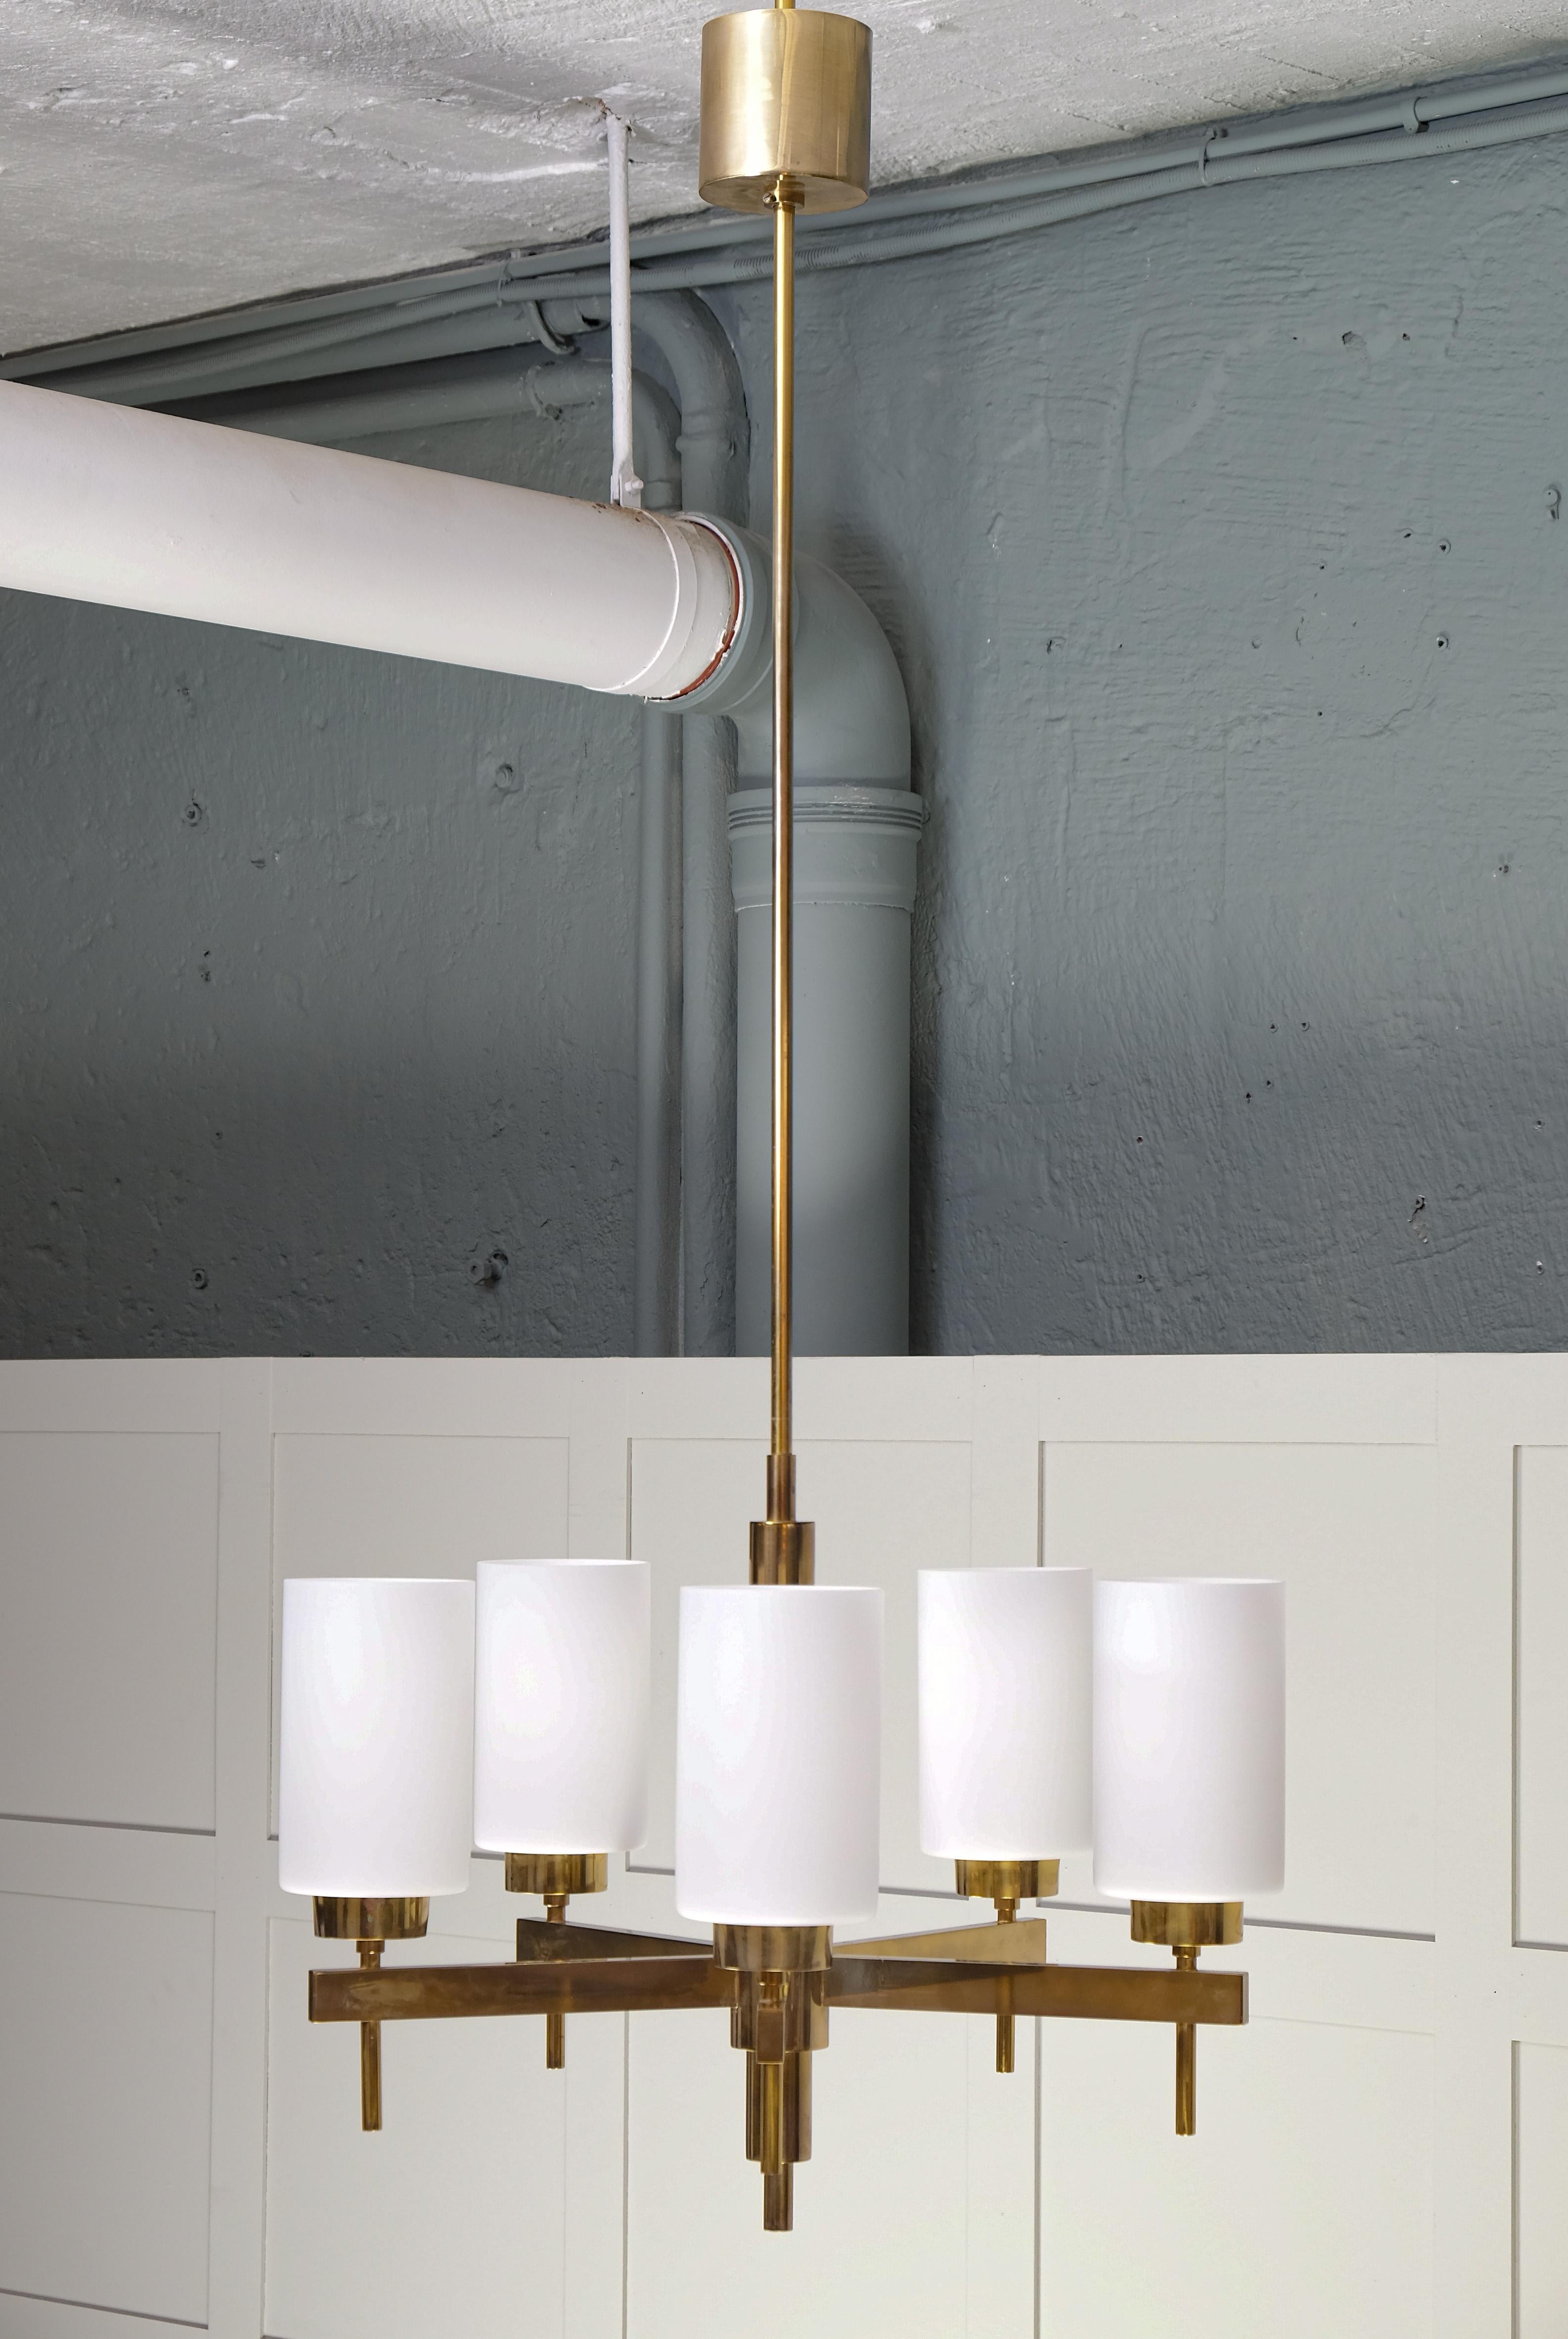 Listed price is for a one (1) chandelier. 
Opaline glass and brass. Designed by Hans-Agne Jakobsson and produced by Hans-Agne Jakobsson AB in Markaryd, Sweden, 1960s. 
Measurements: 
Height 135 cm (Can be shortened/extended up on